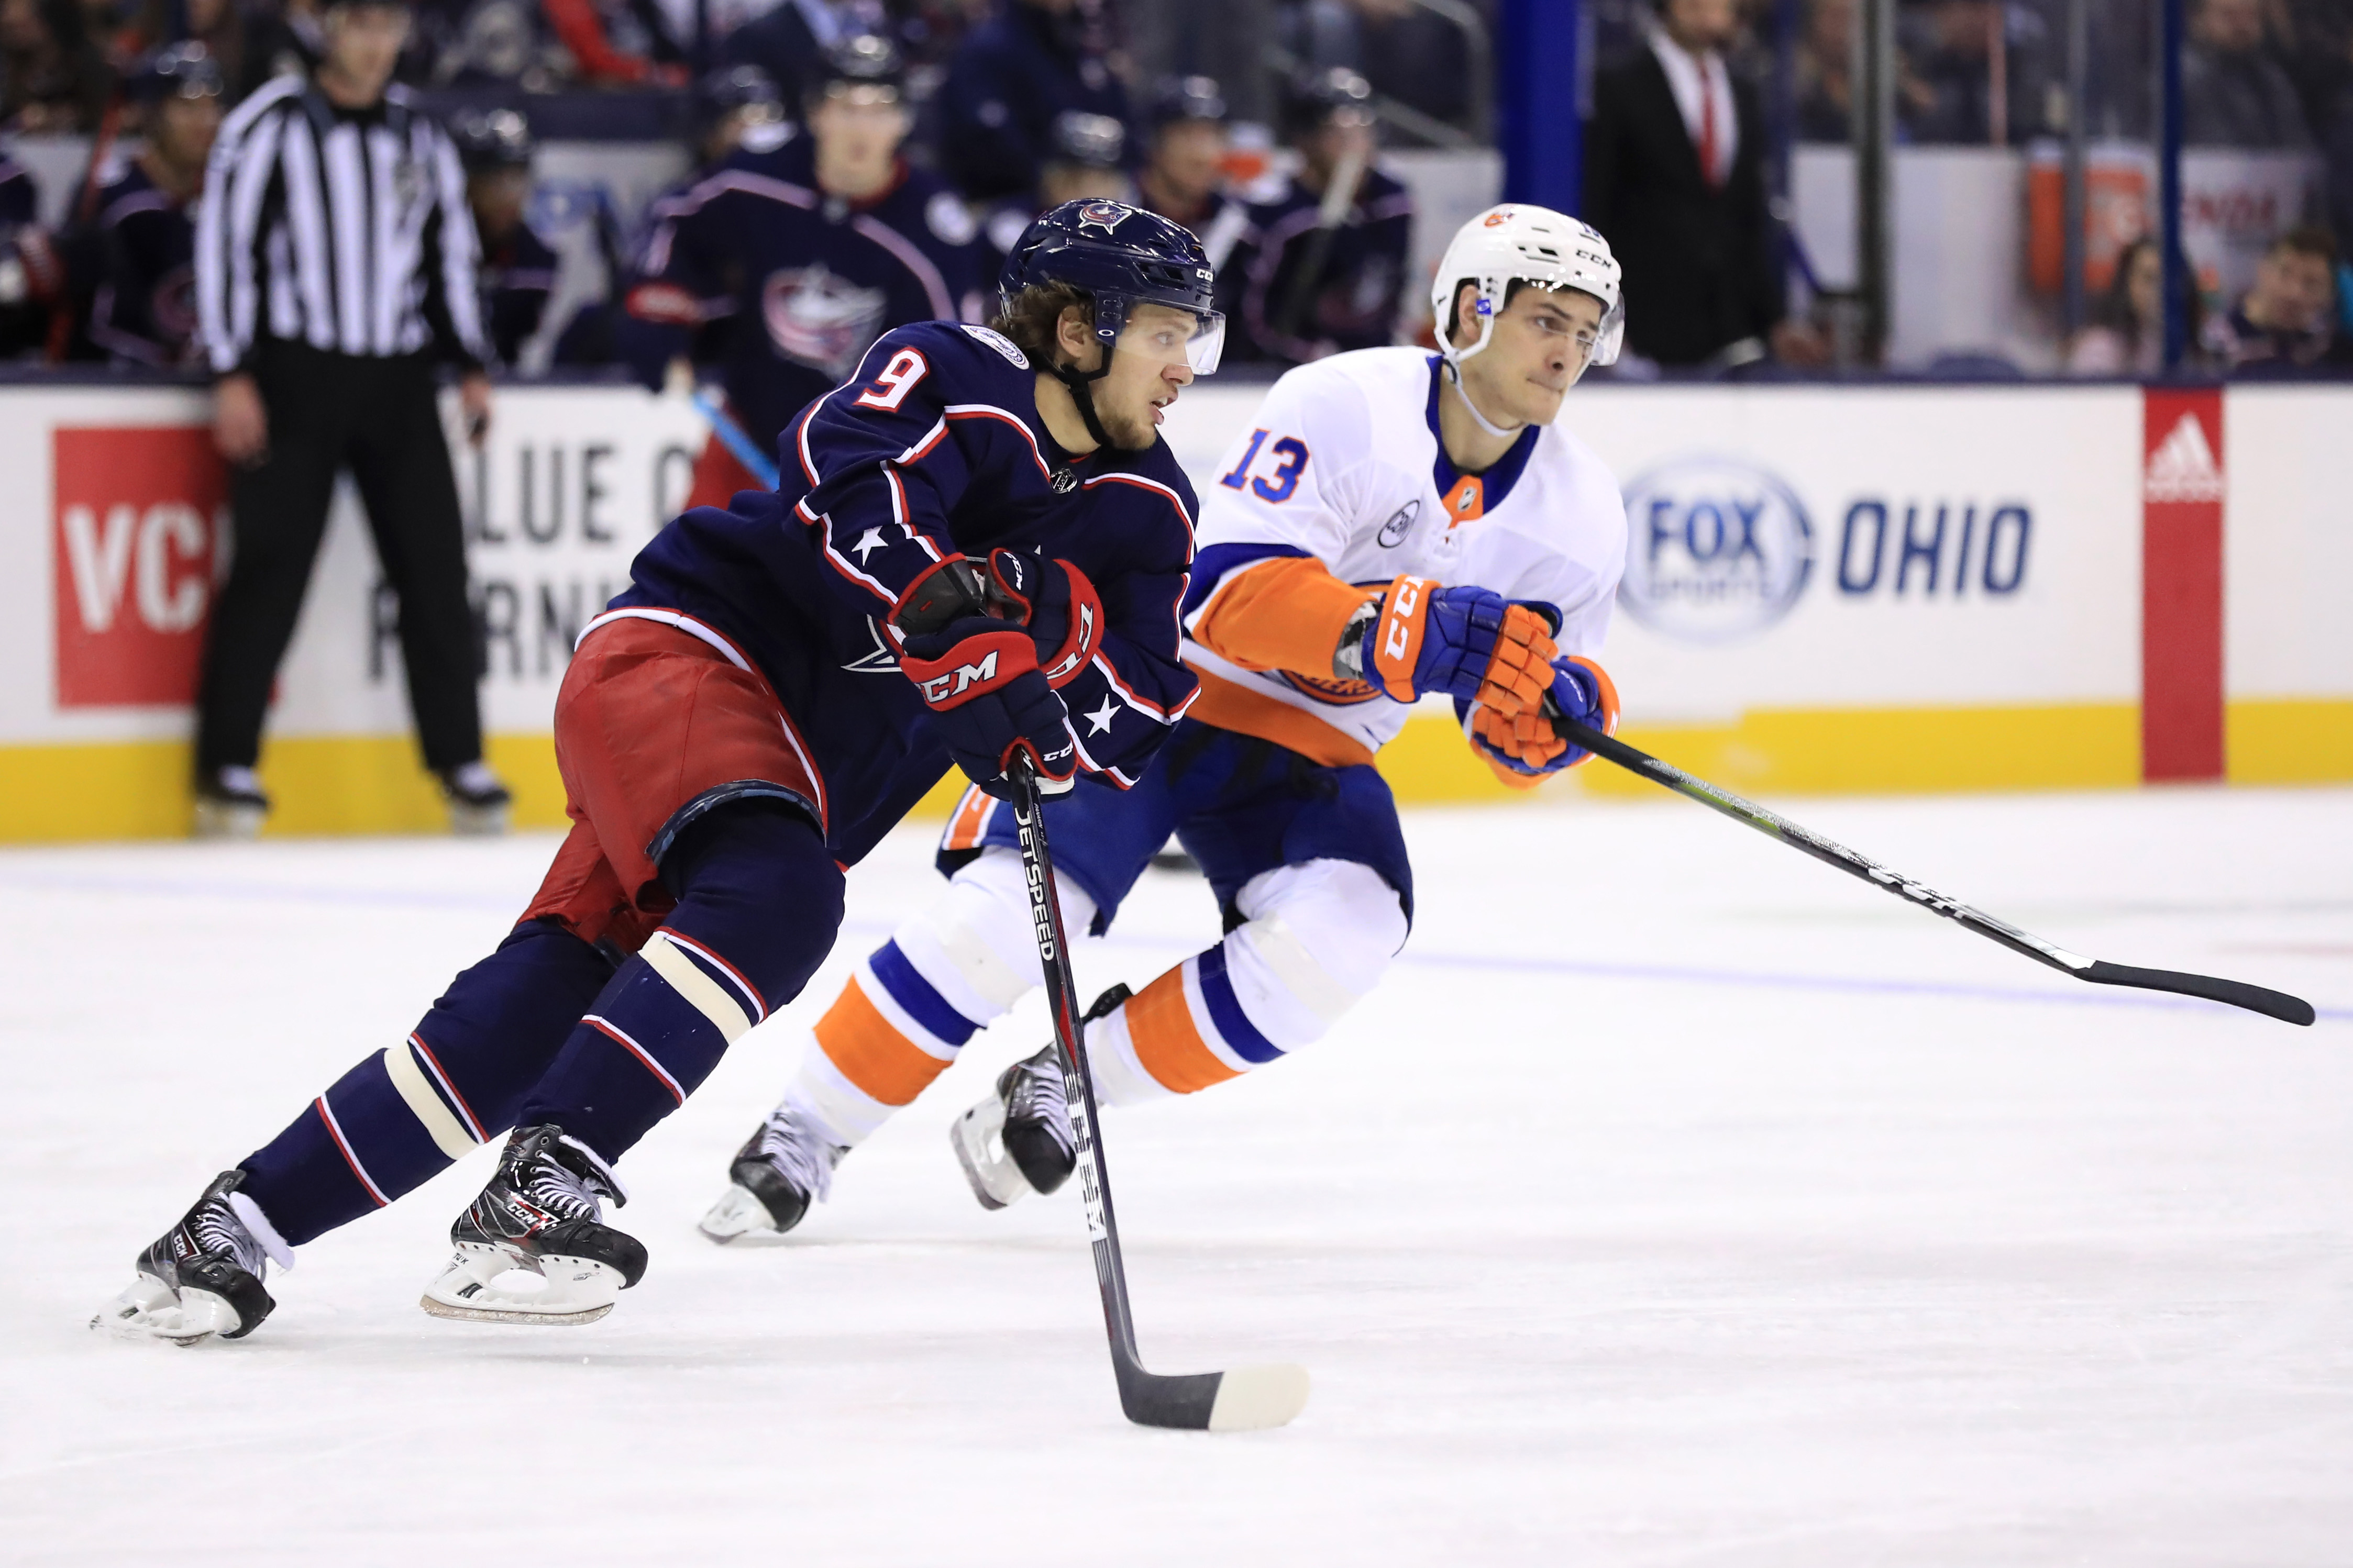 Feb 14, 2019; Columbus, OH, USA; Columbus Blue Jackets left wing Artemi Panarin (9) skates with the puck against New York Islanders center Mathew Barzal (13) in the third period at Nationwide Arena. Mandatory Credit: Aaron Doster-USA TODAY Sports